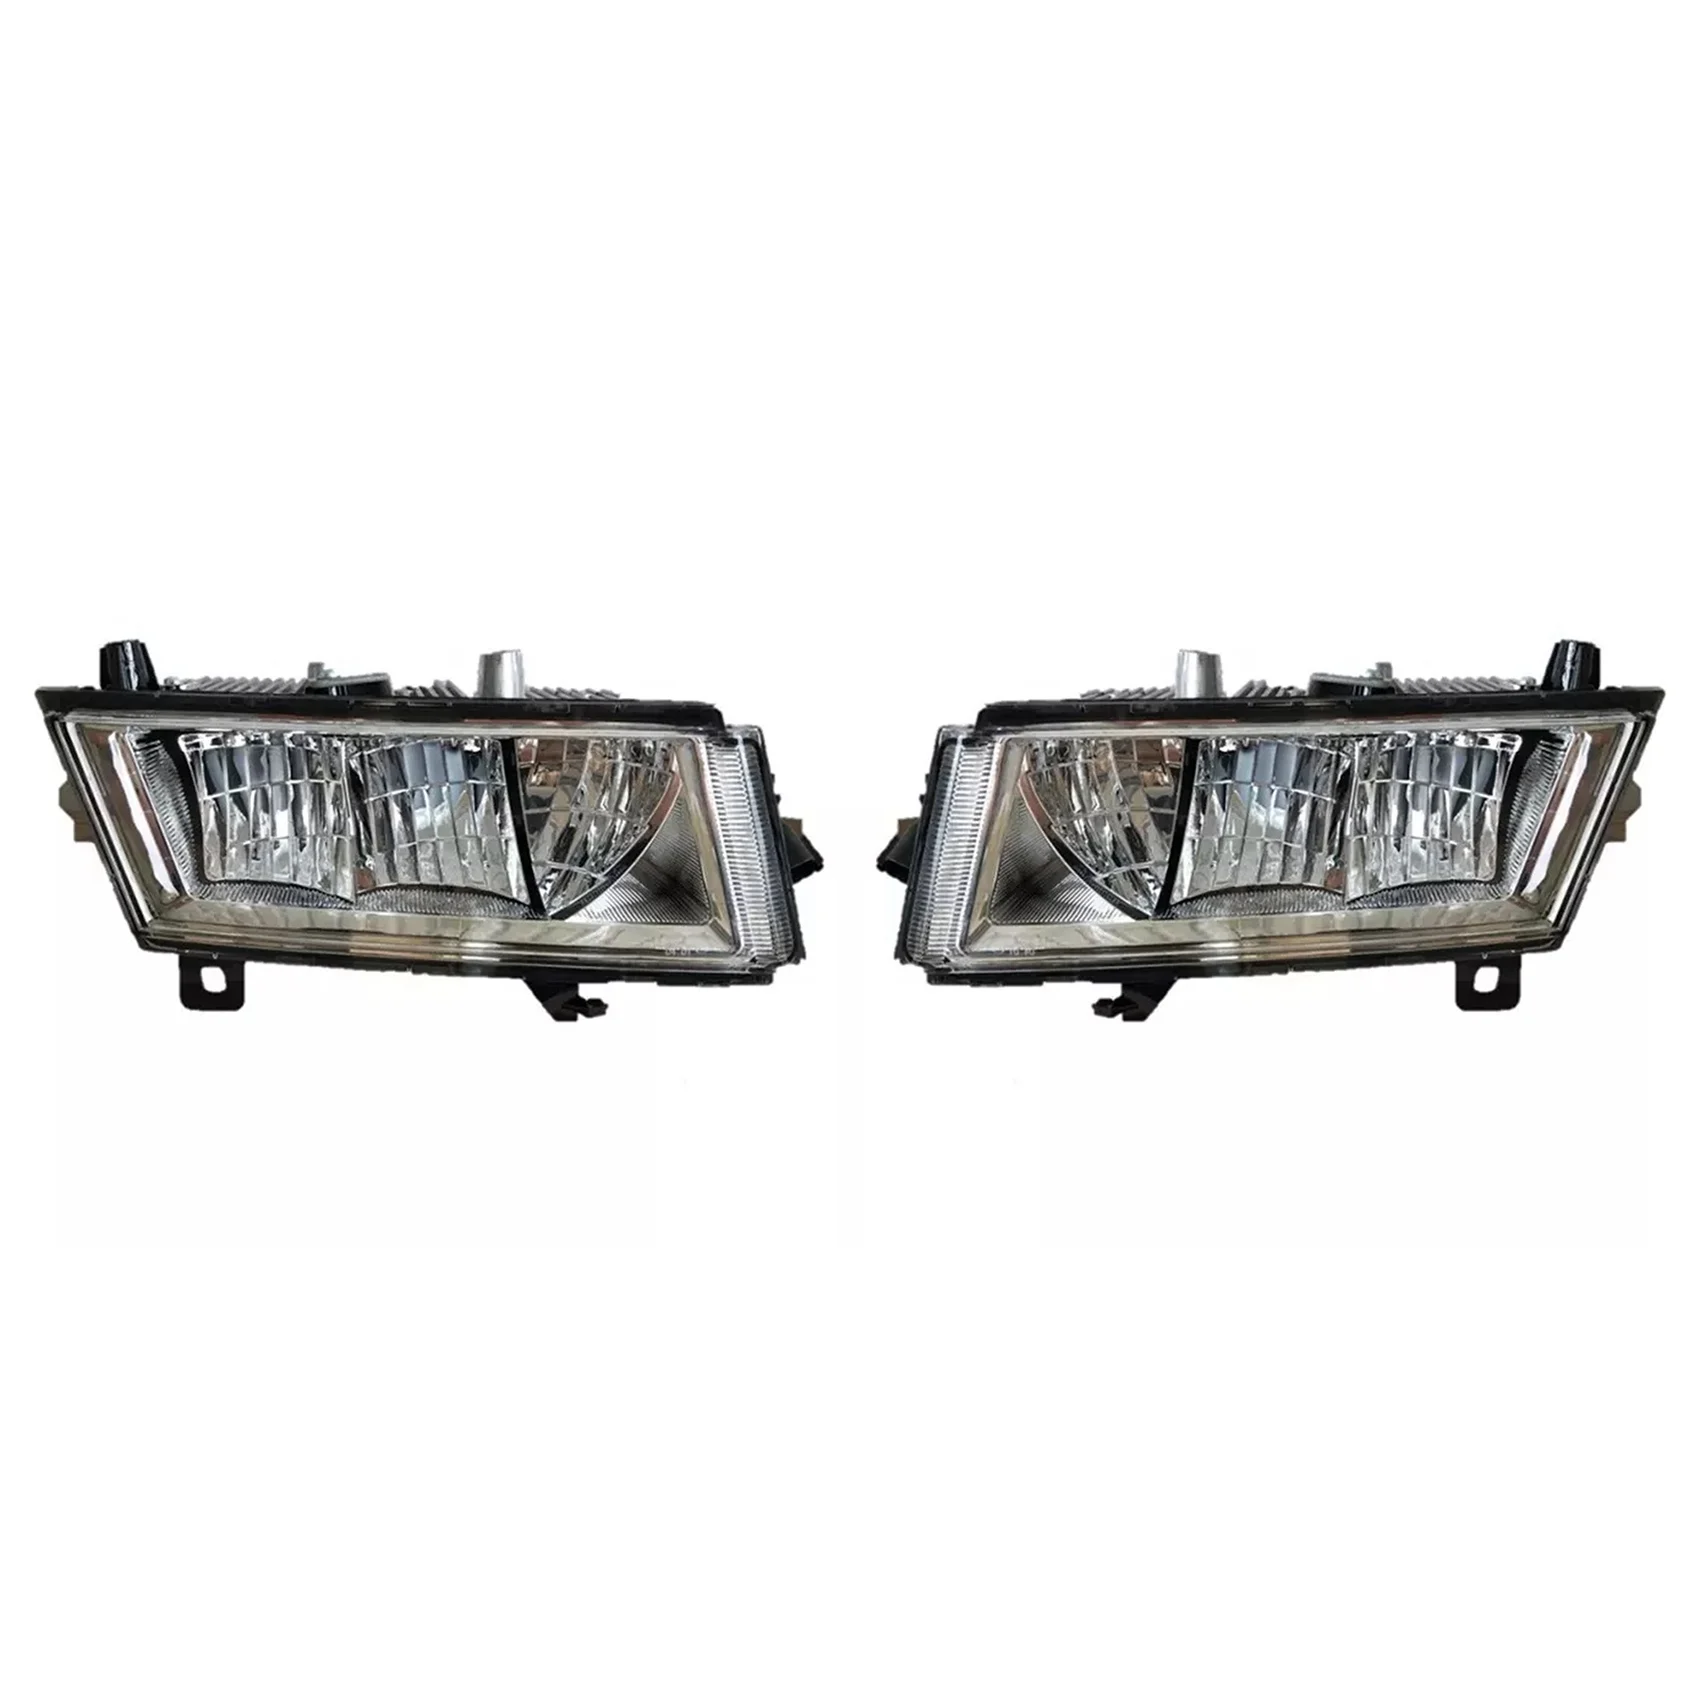 

Front Right 24V LED Fog Lamp Clearance Lights for Scania R650 G500 S730 S500 P500 Truck 2552715 2552718 R